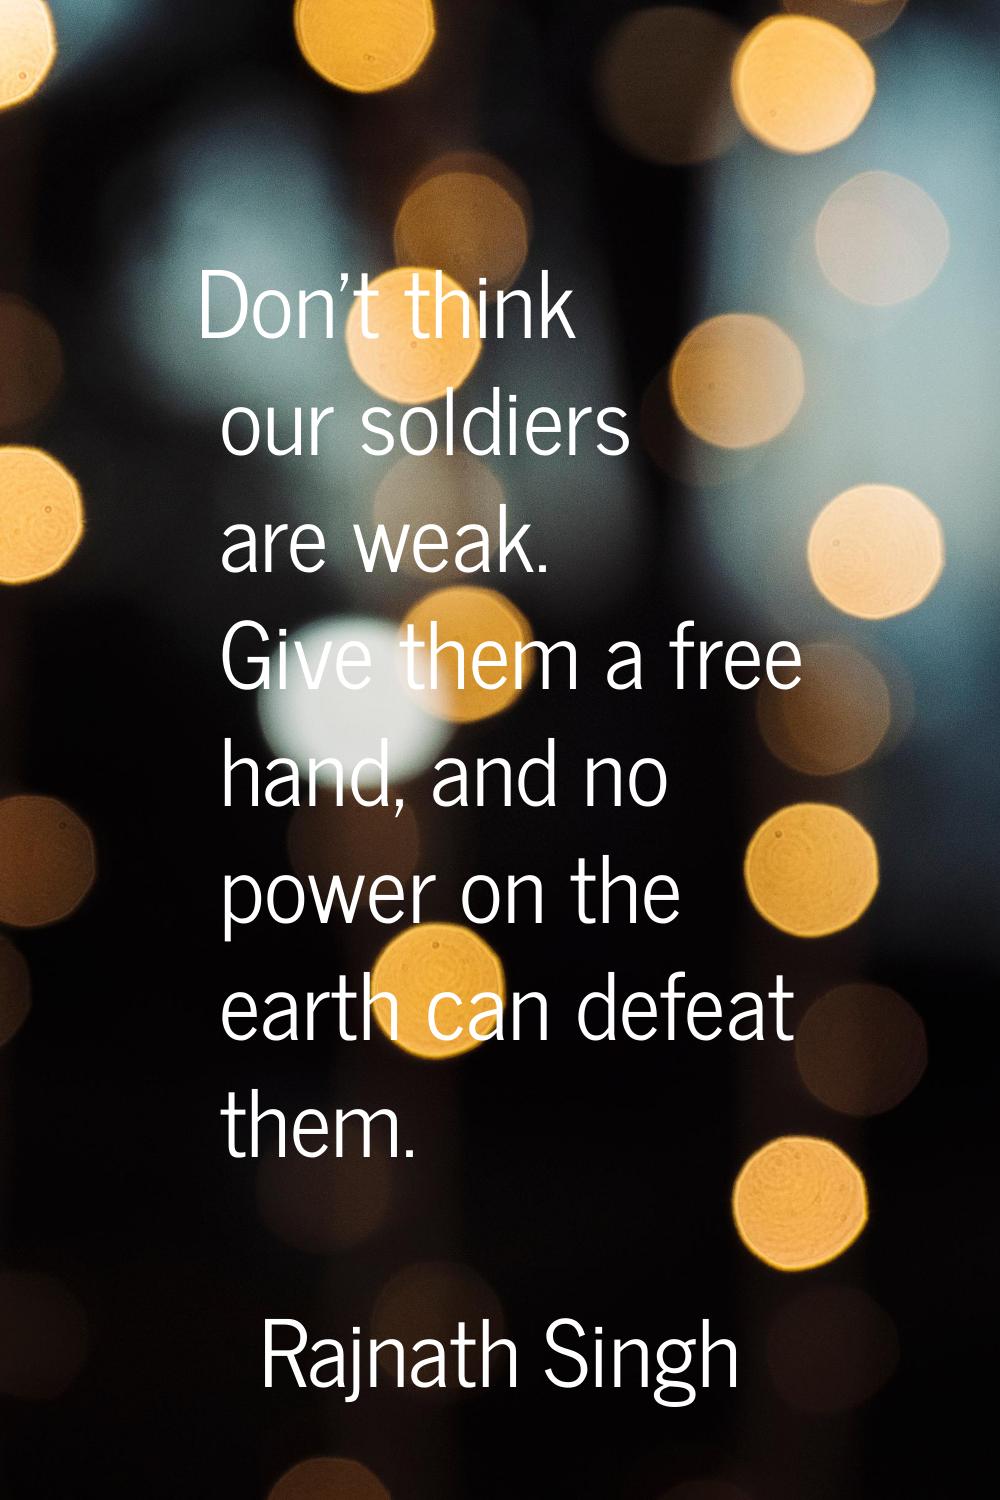 Don't think our soldiers are weak. Give them a free hand, and no power on the earth can defeat them